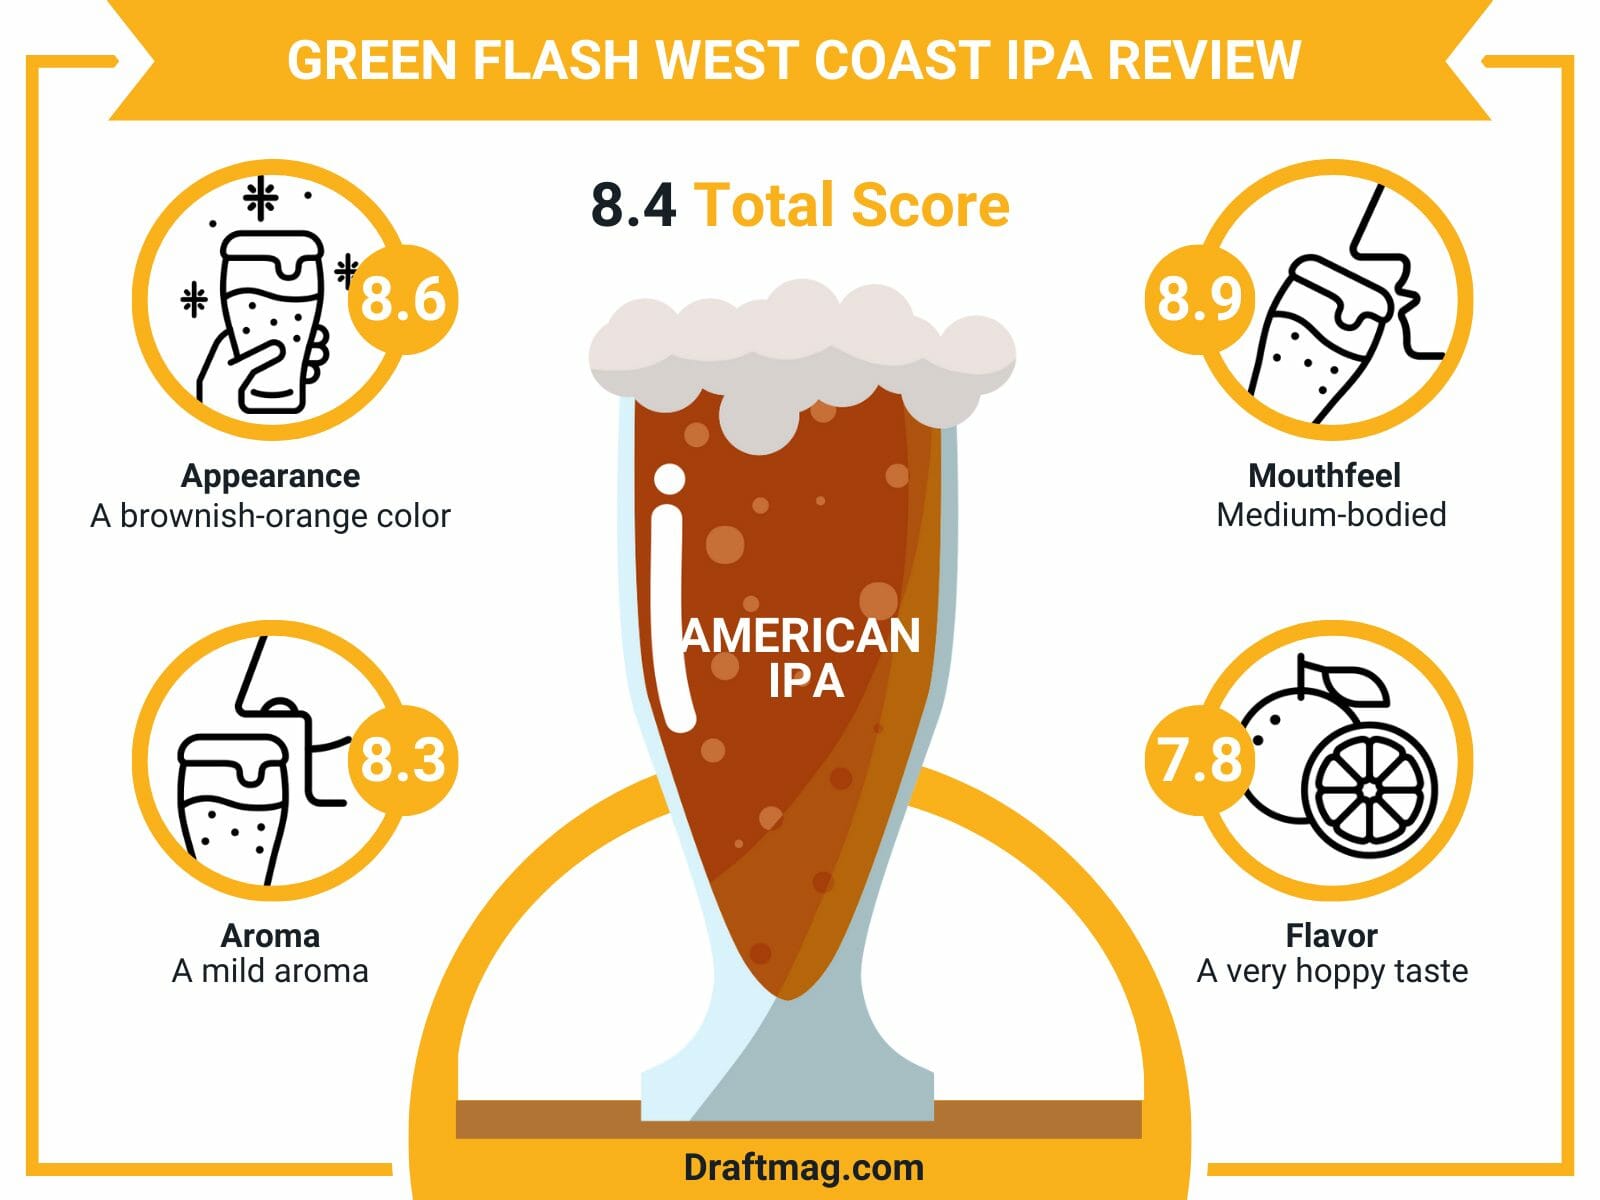 Green flash west coast ipa review infographic